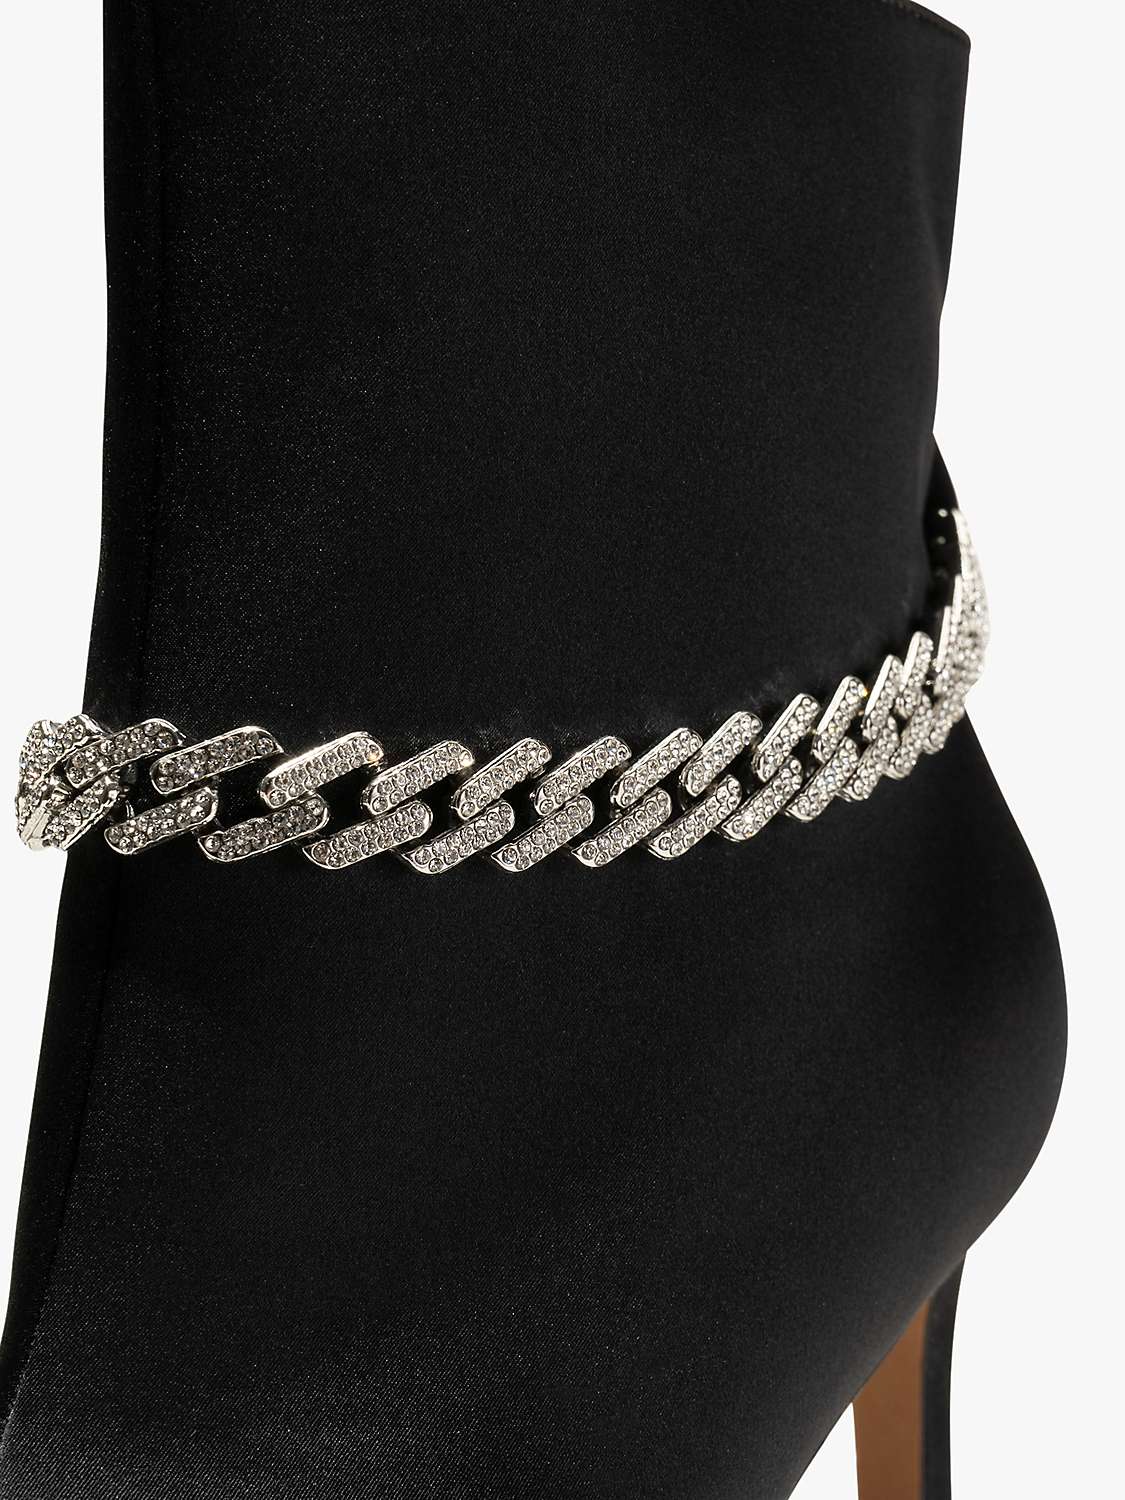 Buy SHOE THE BEAR Harper Satin Chain Ankle Boots, Black Online at johnlewis.com